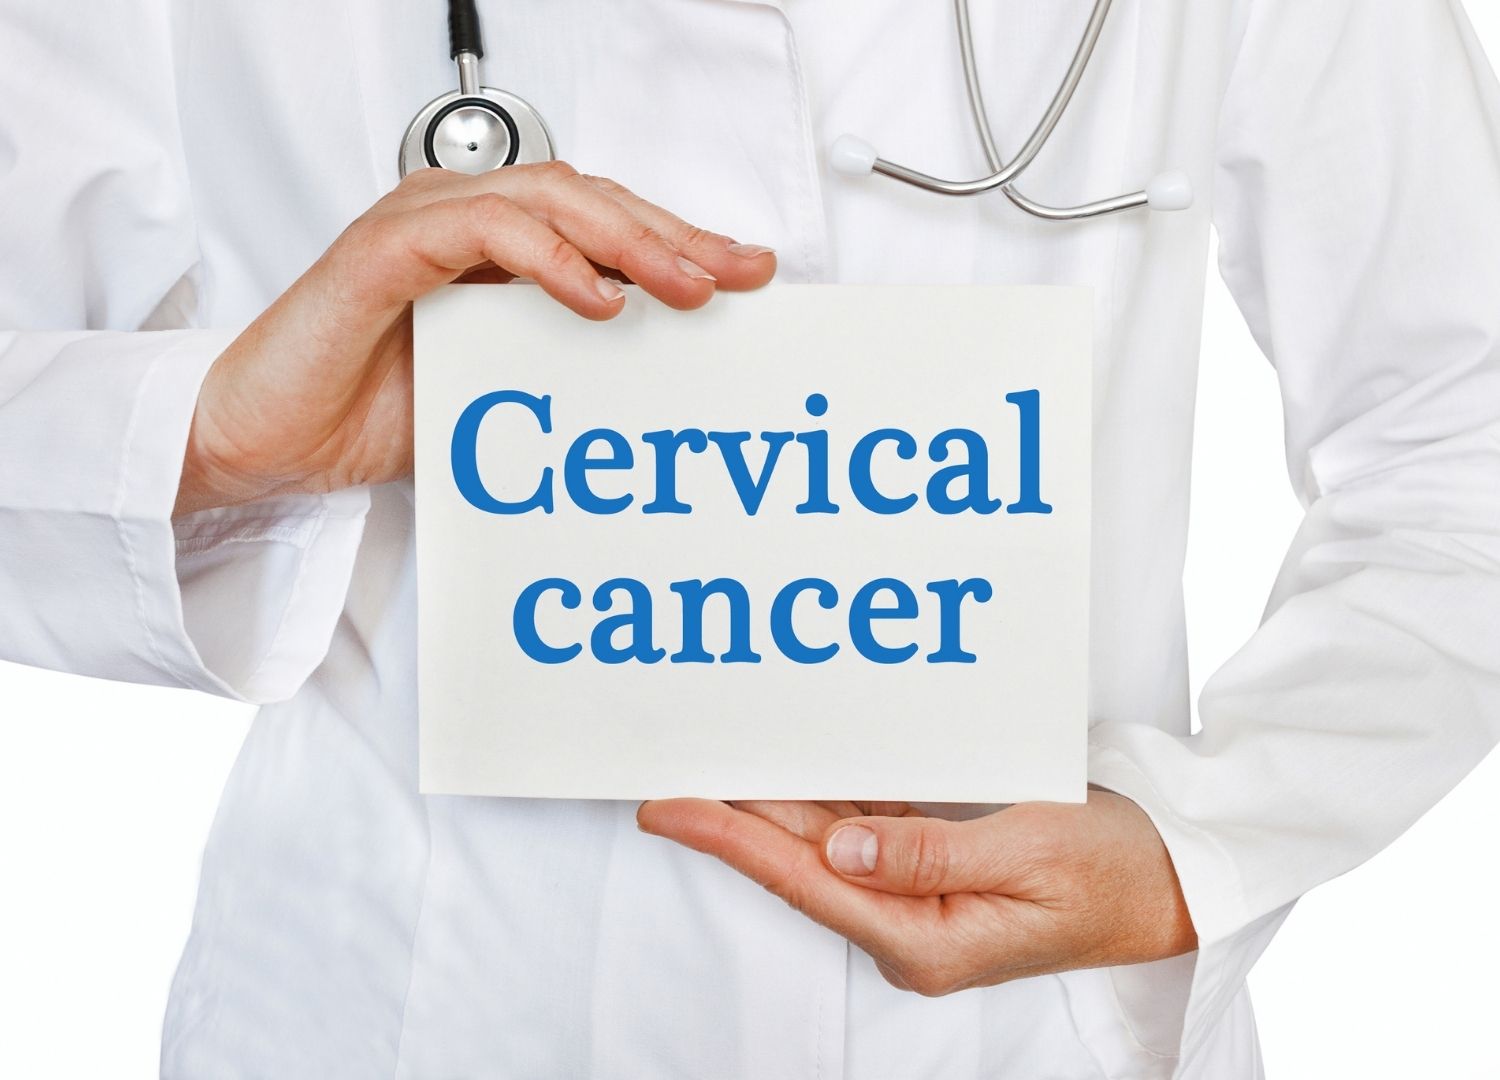 Cervical Cancer: Risk Factors, Causes and Treatment.